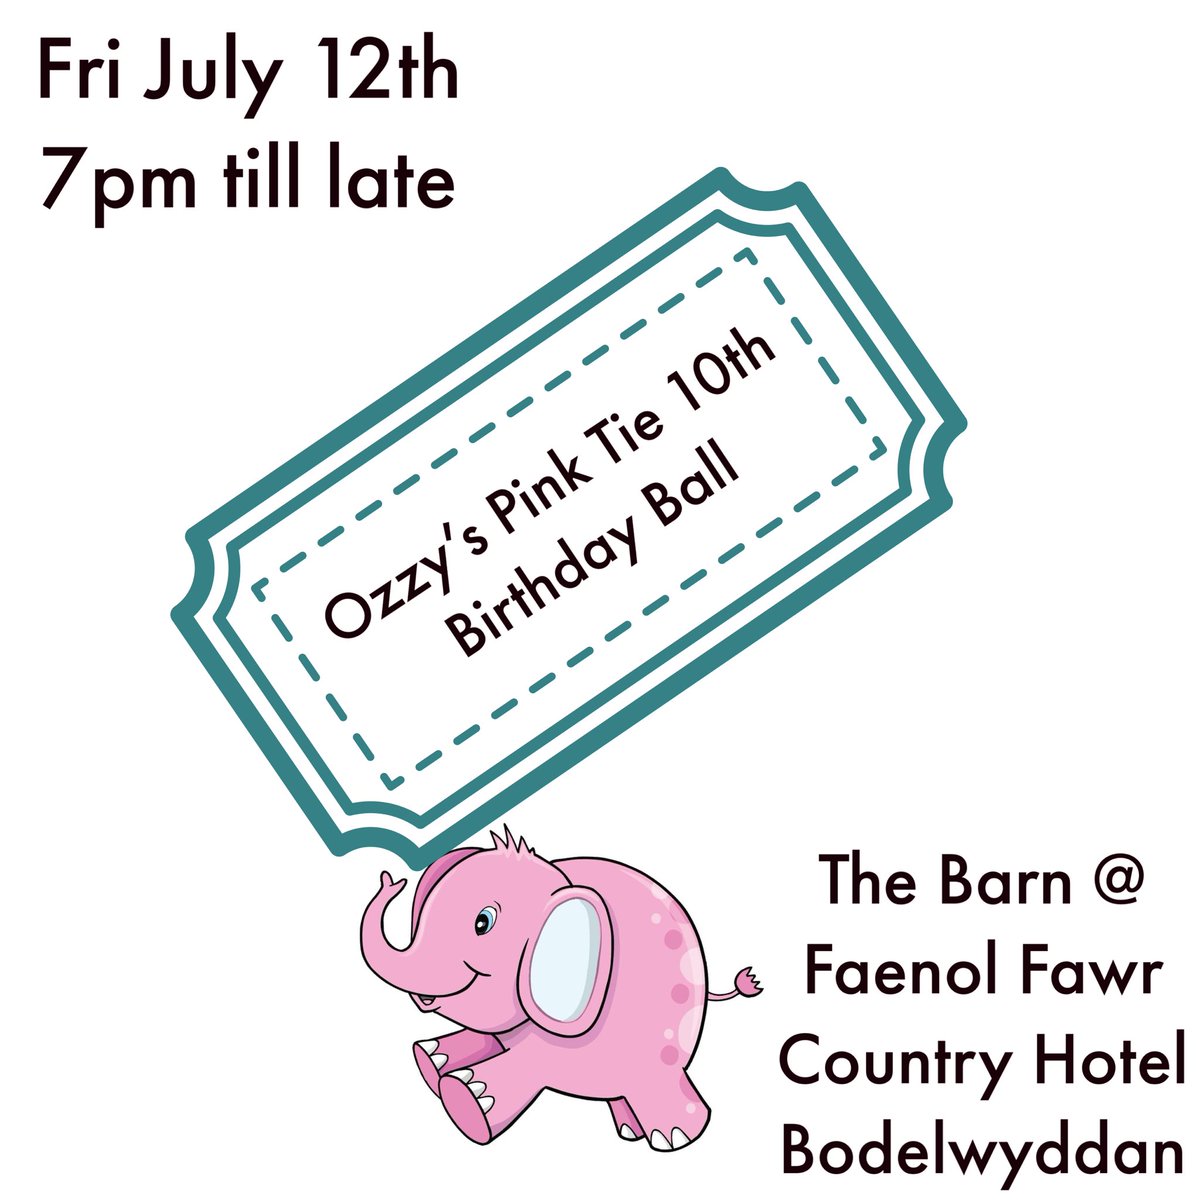 Secure your place at our Pink Tie 10th Birthday Ball on Fri 12th July with a £10 deposit via justgiving.com/page/ozzy-pink…